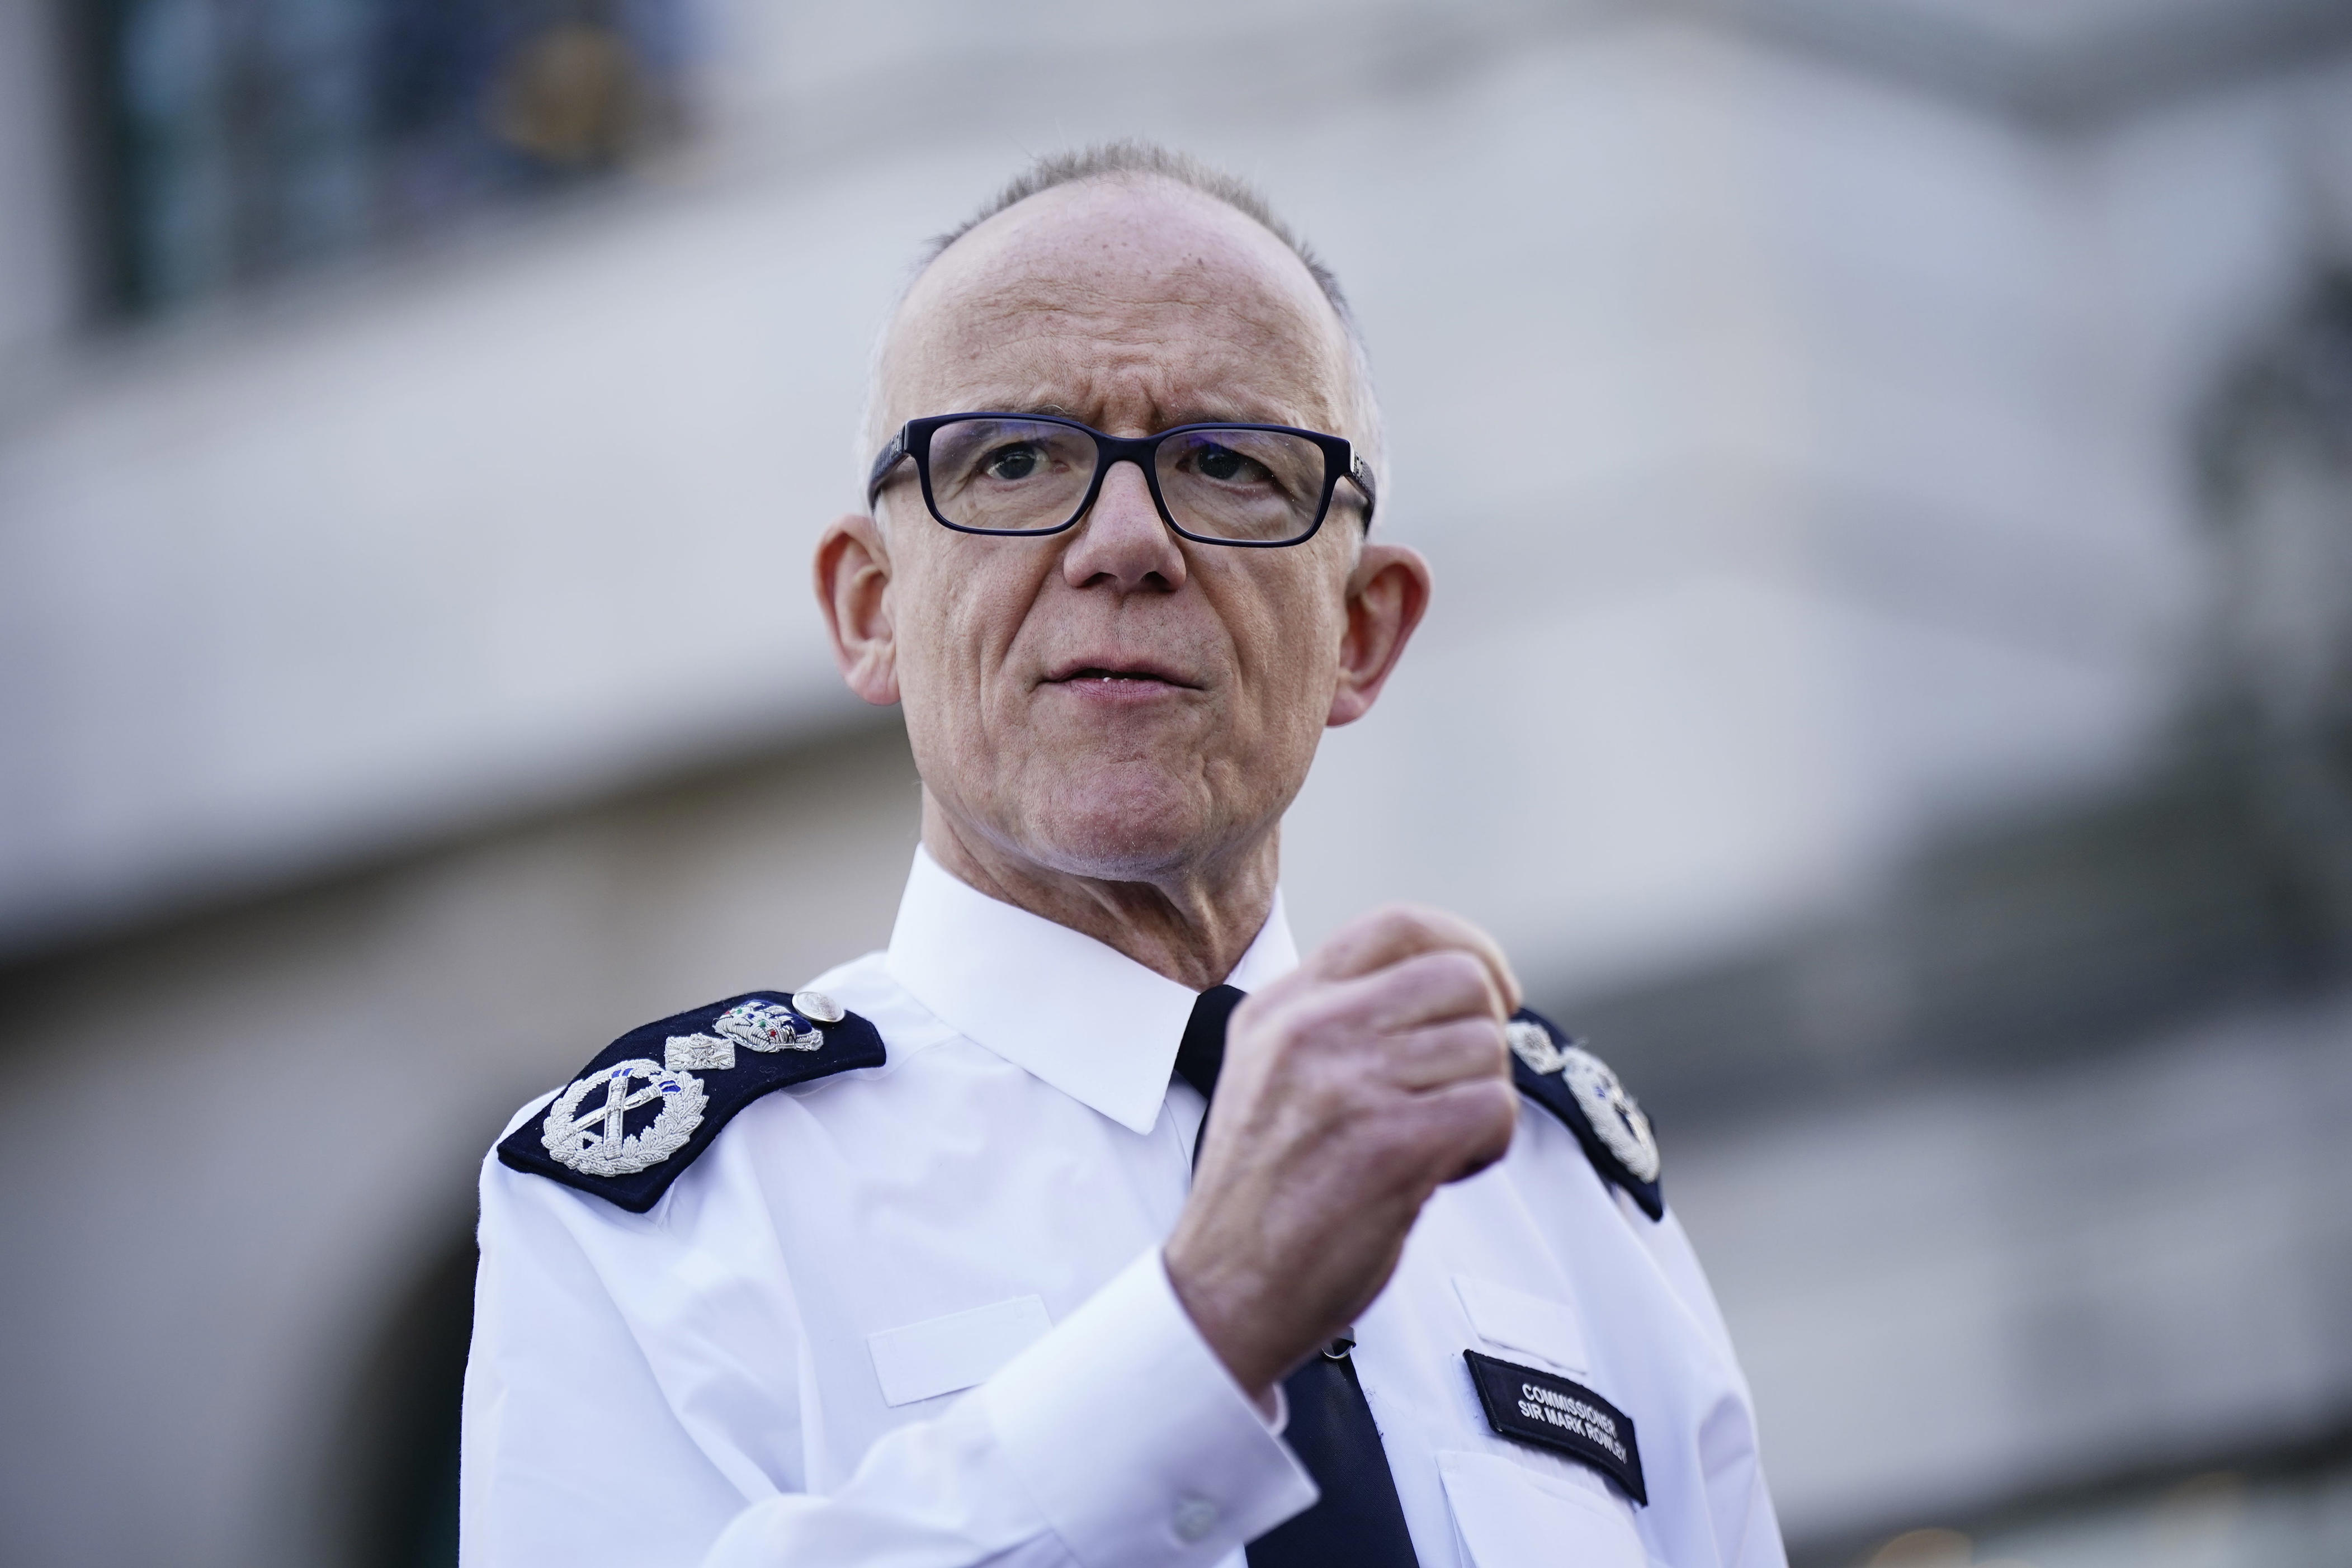 braverman joins calls for met police chief to quit over gaza protests